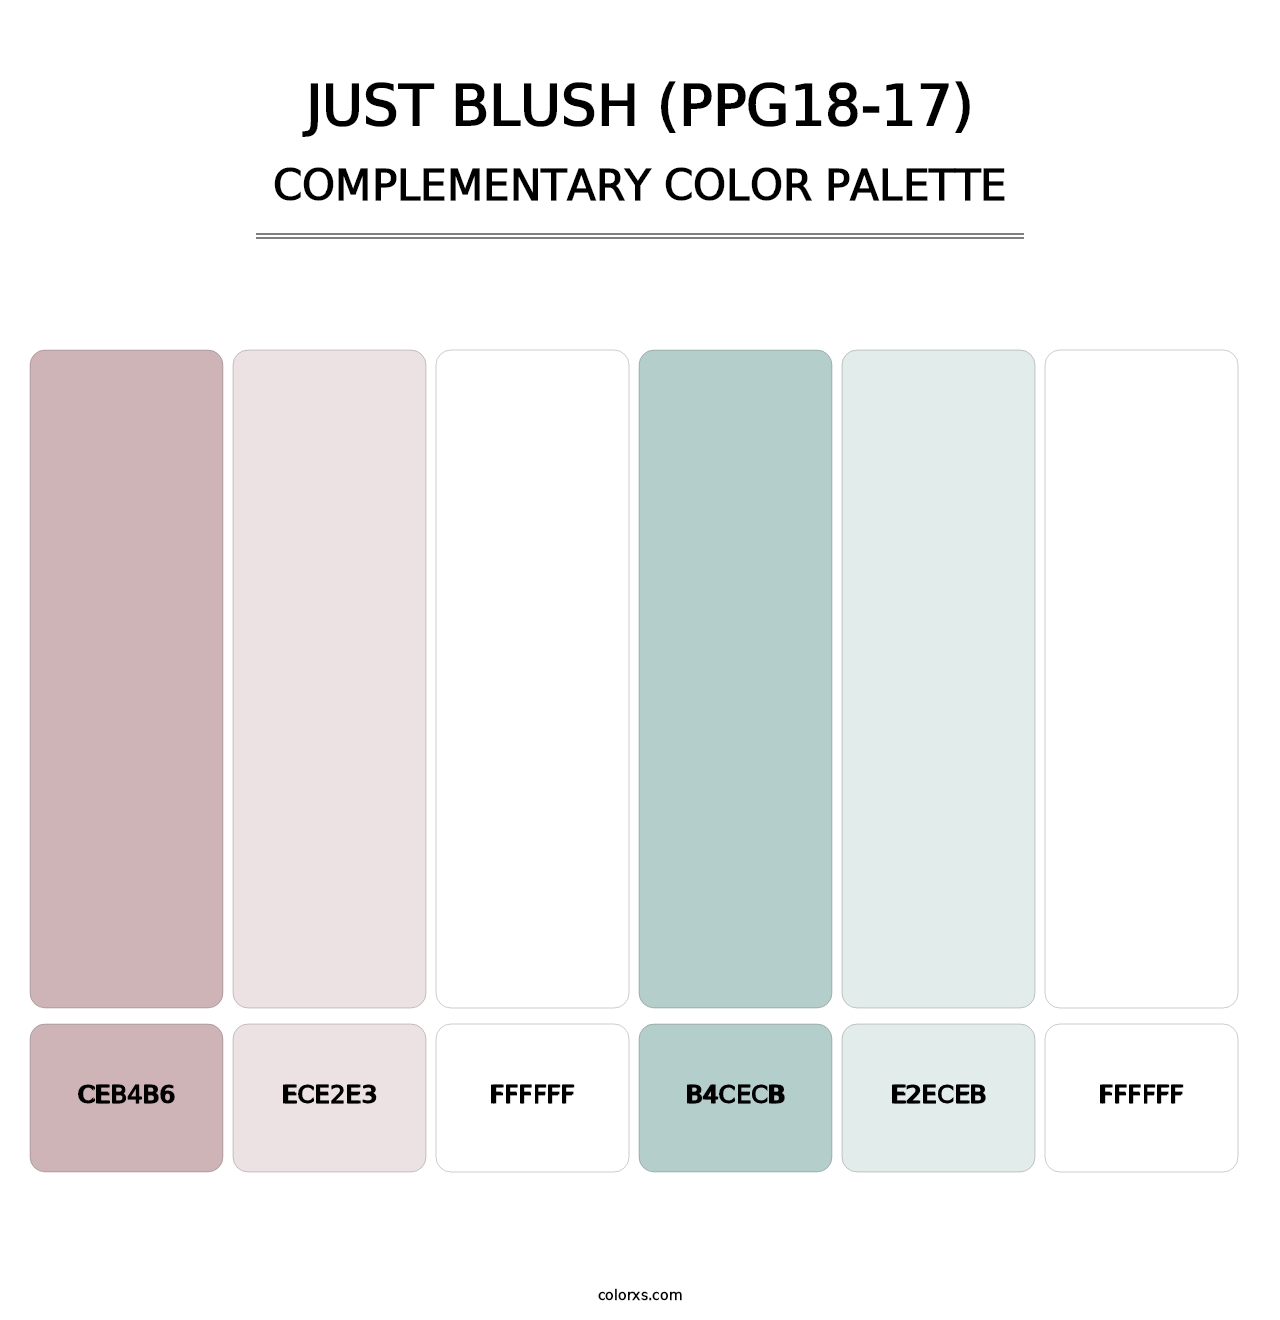 Just Blush (PPG18-17) - Complementary Color Palette